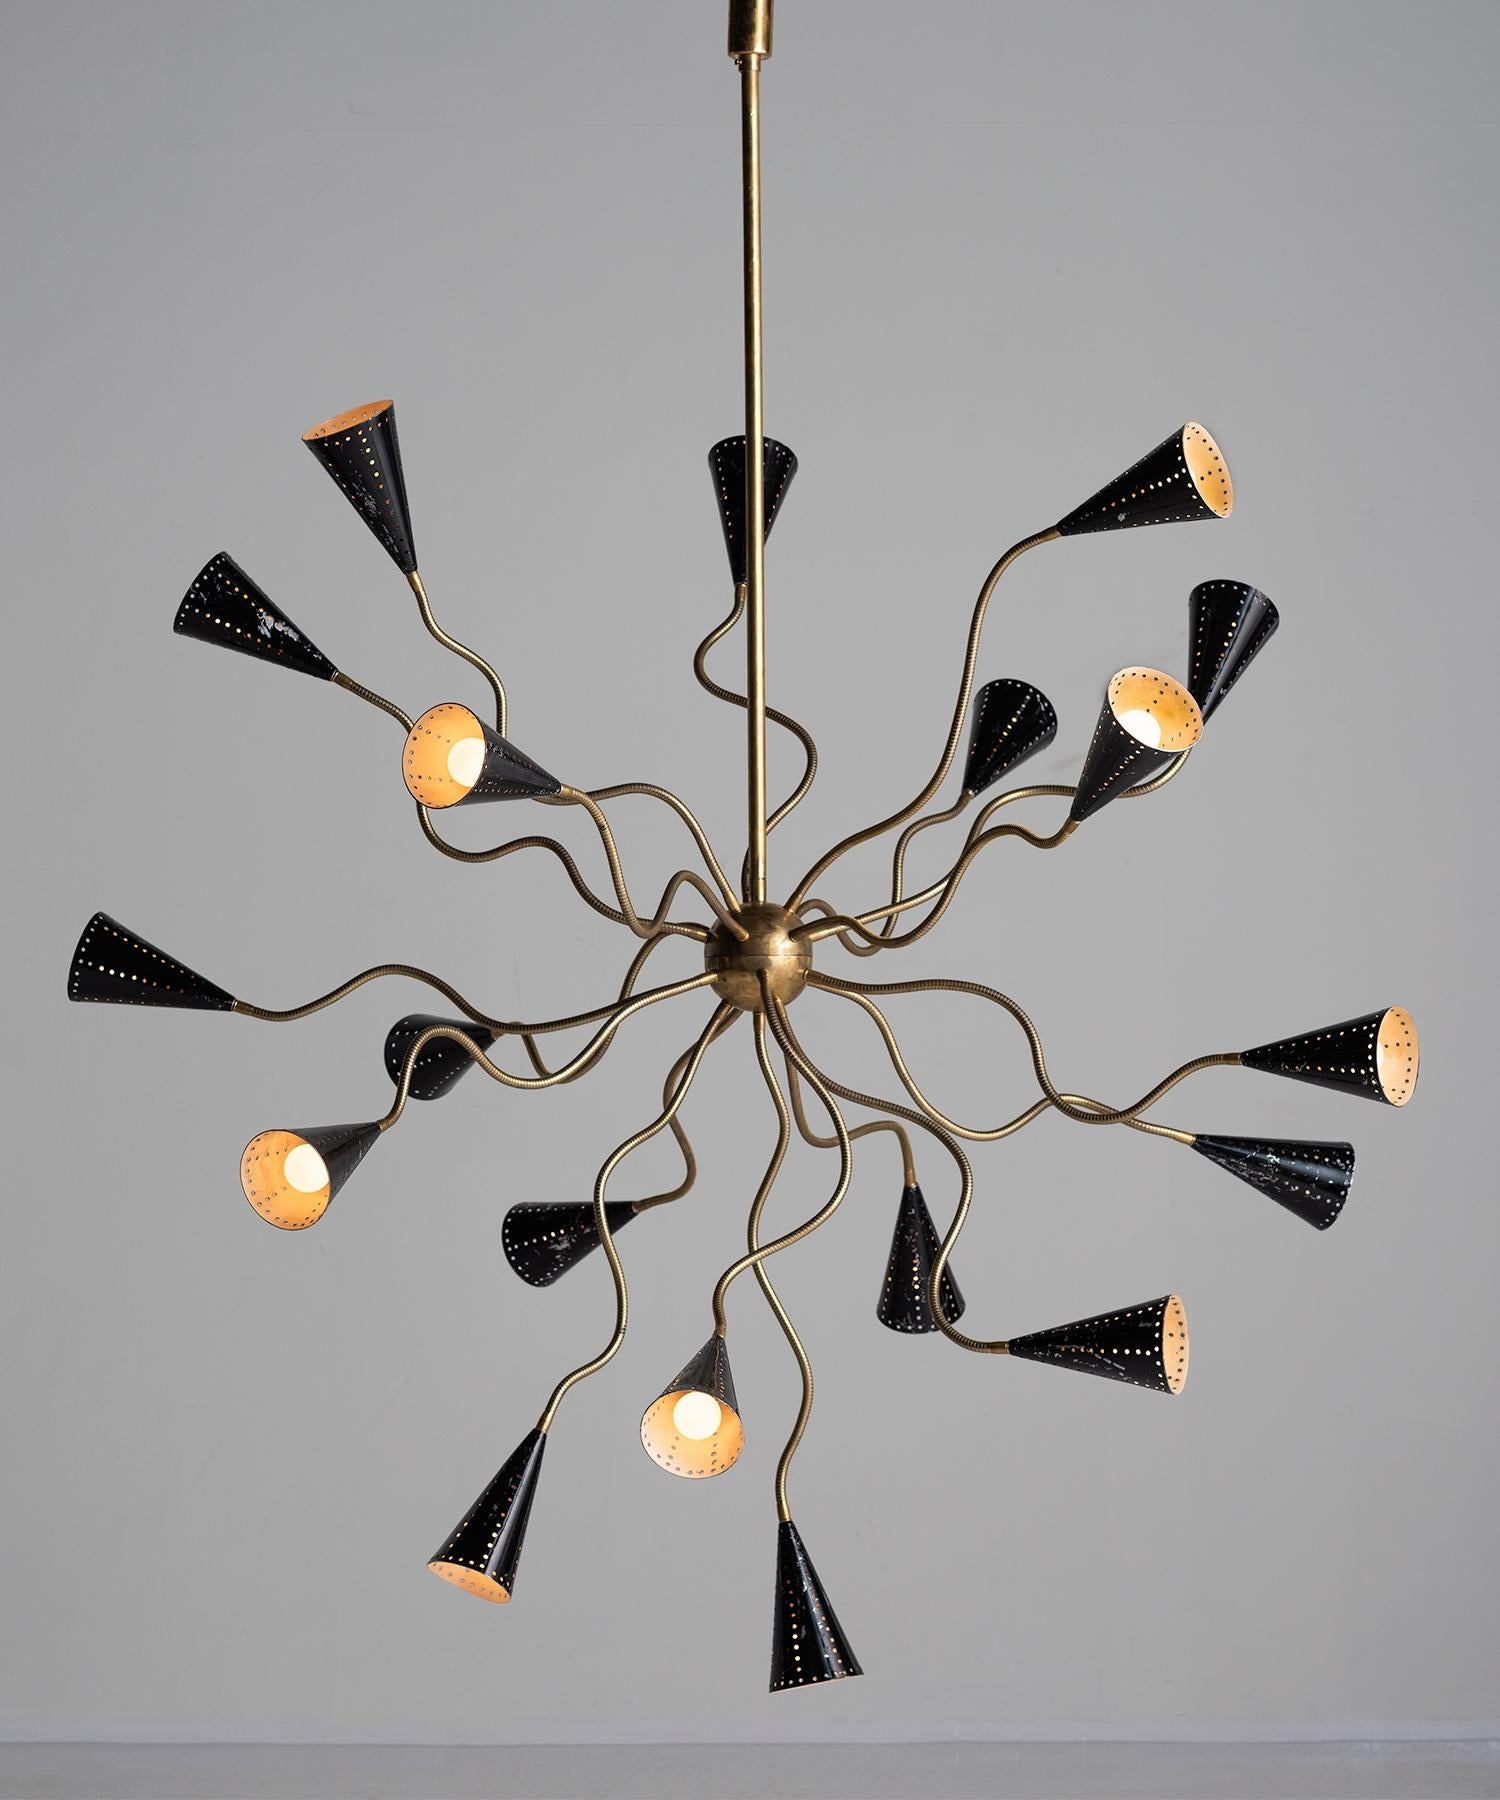 Octopus Sputnik chandelier, Italy, circa 1960.

Metamorphic chandelier with 19 articulating brass arms and painted black perforated metal shades.